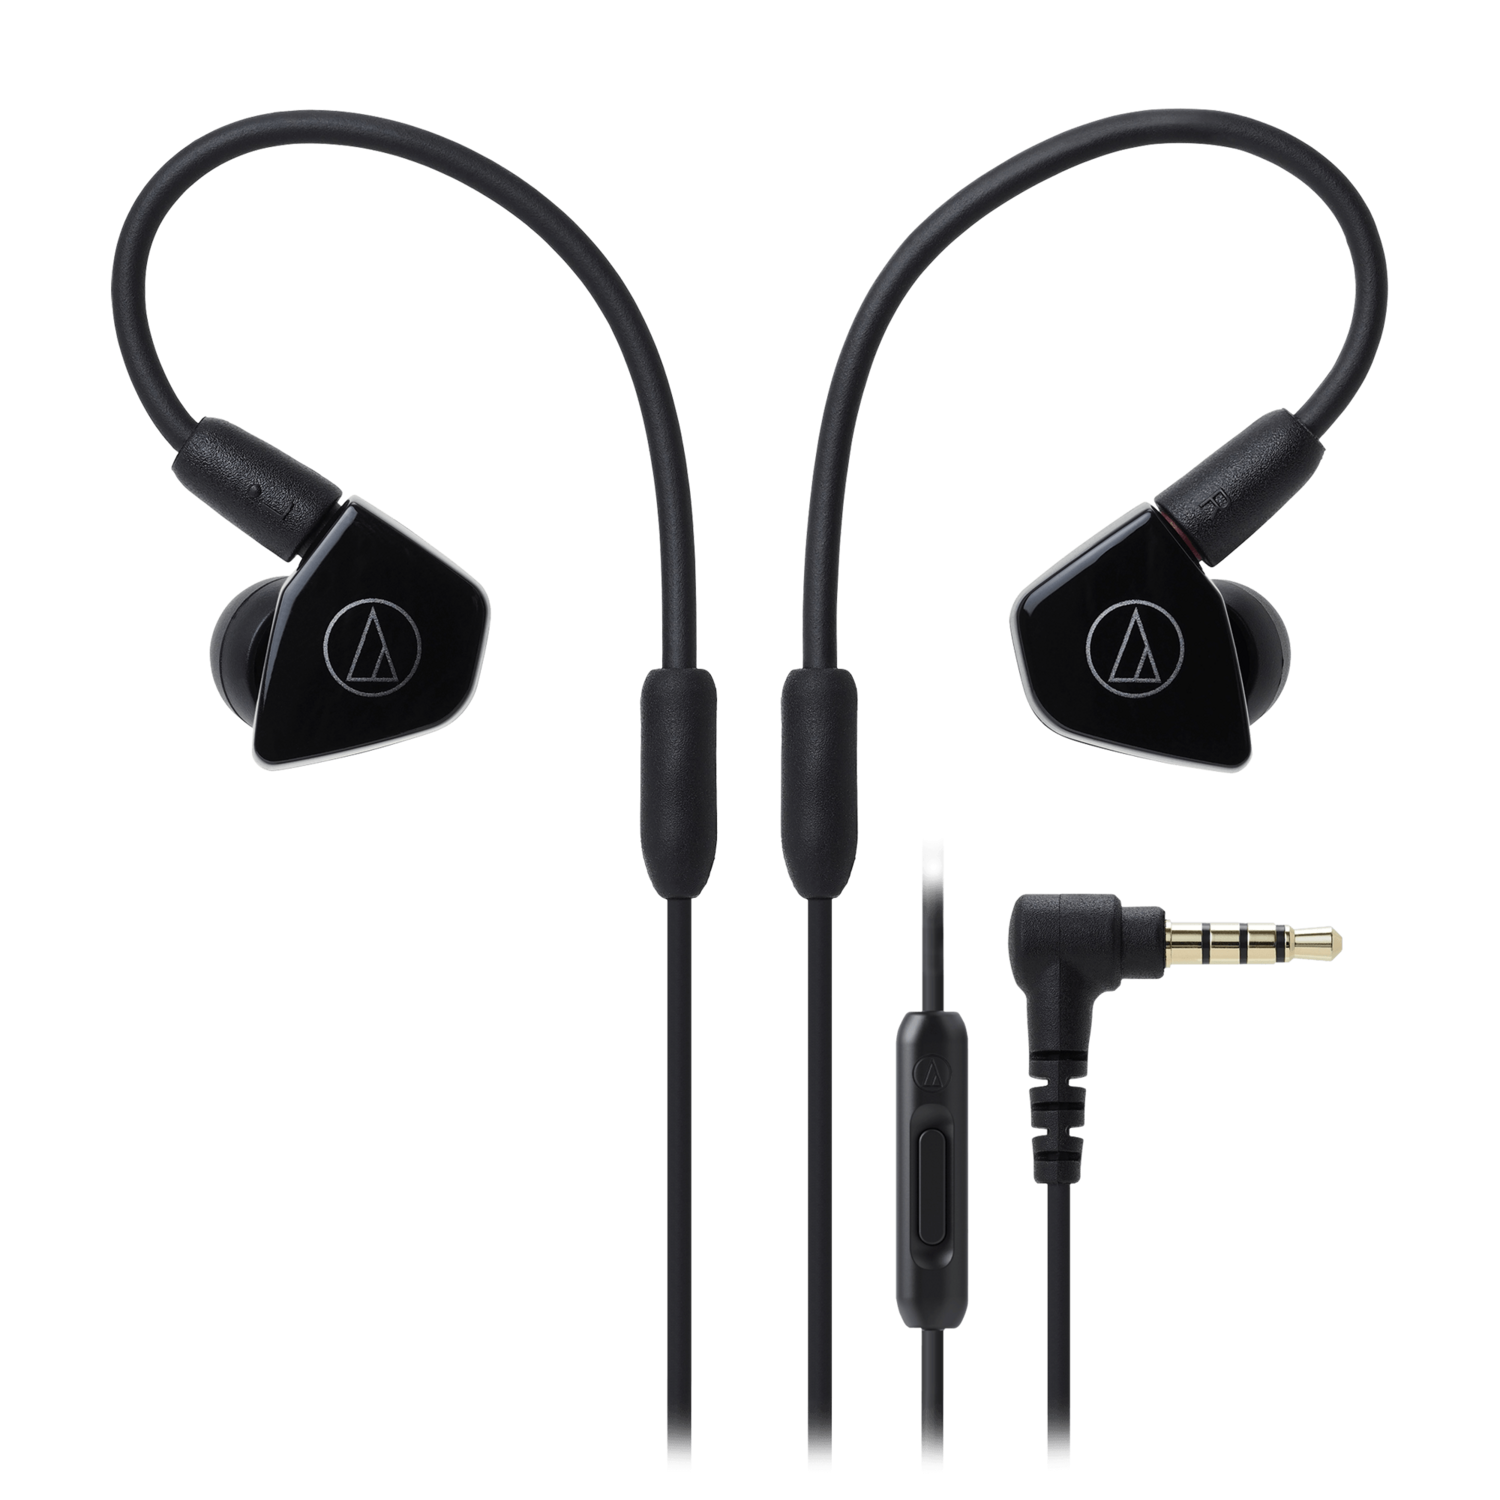 Audio Technica In-Ear Headphones with In-line Mic & Control
ATH-LS50iS